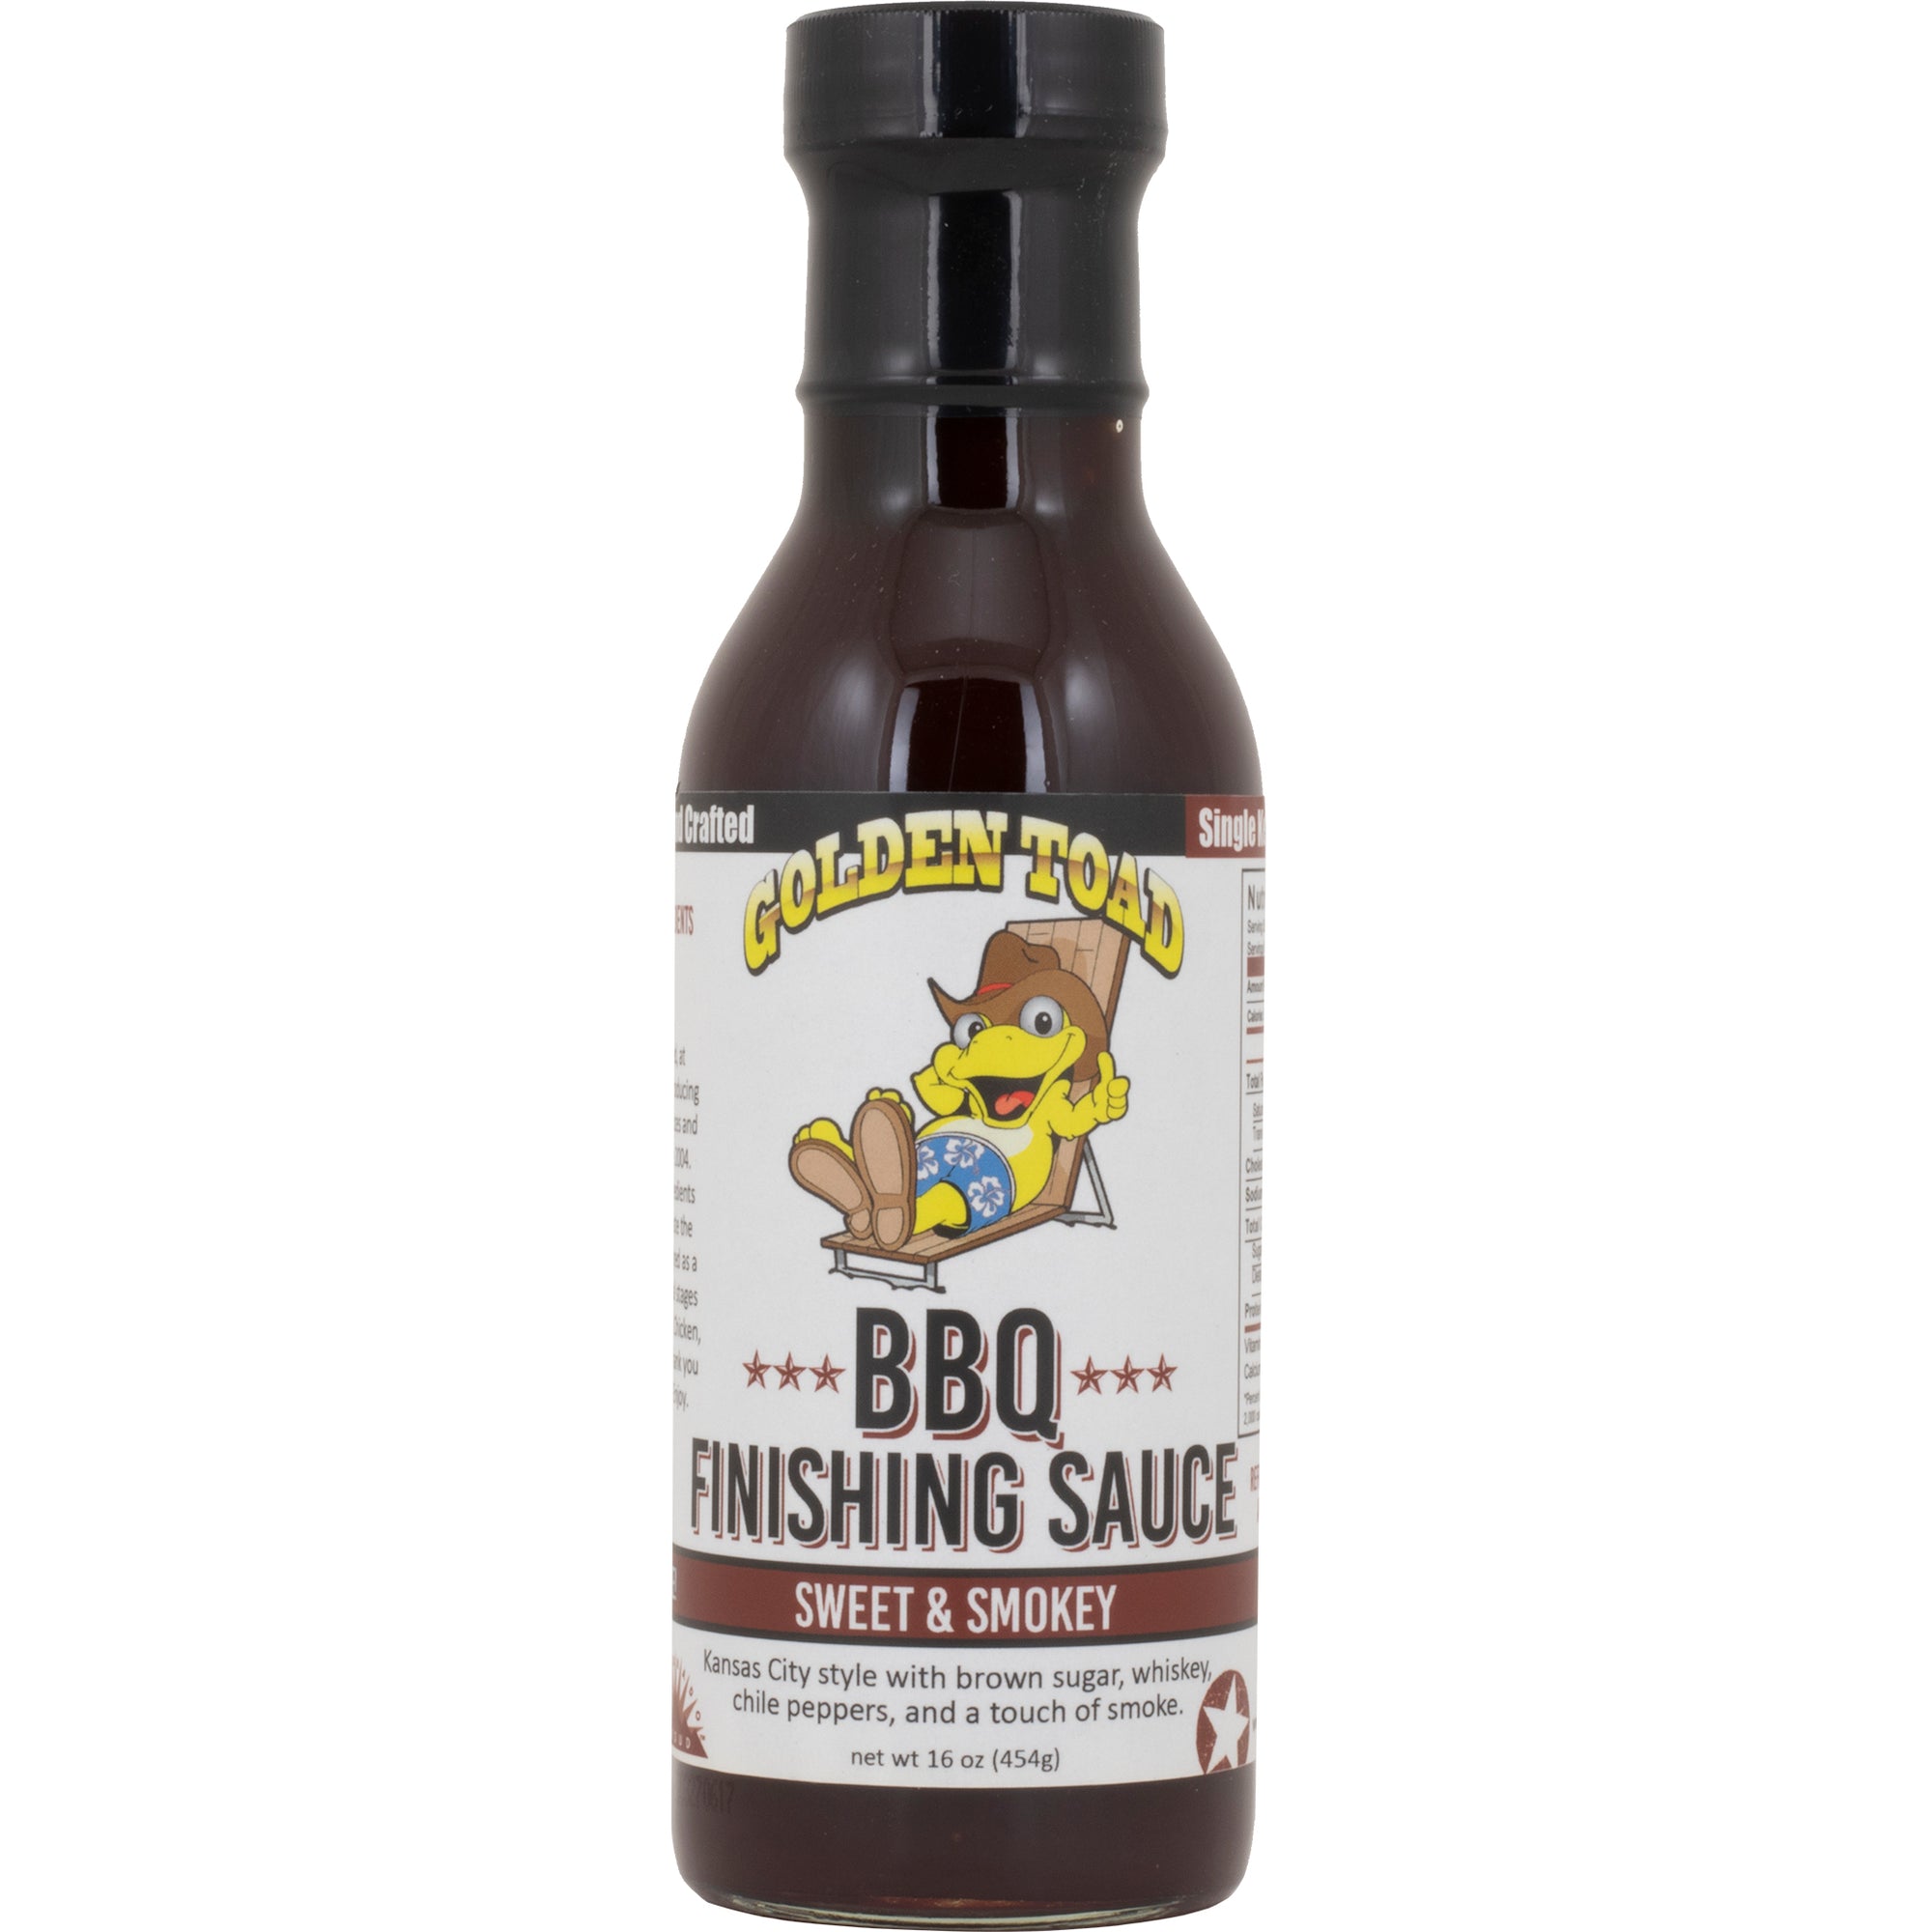 Golden Toad BBQ Finishing Sauce